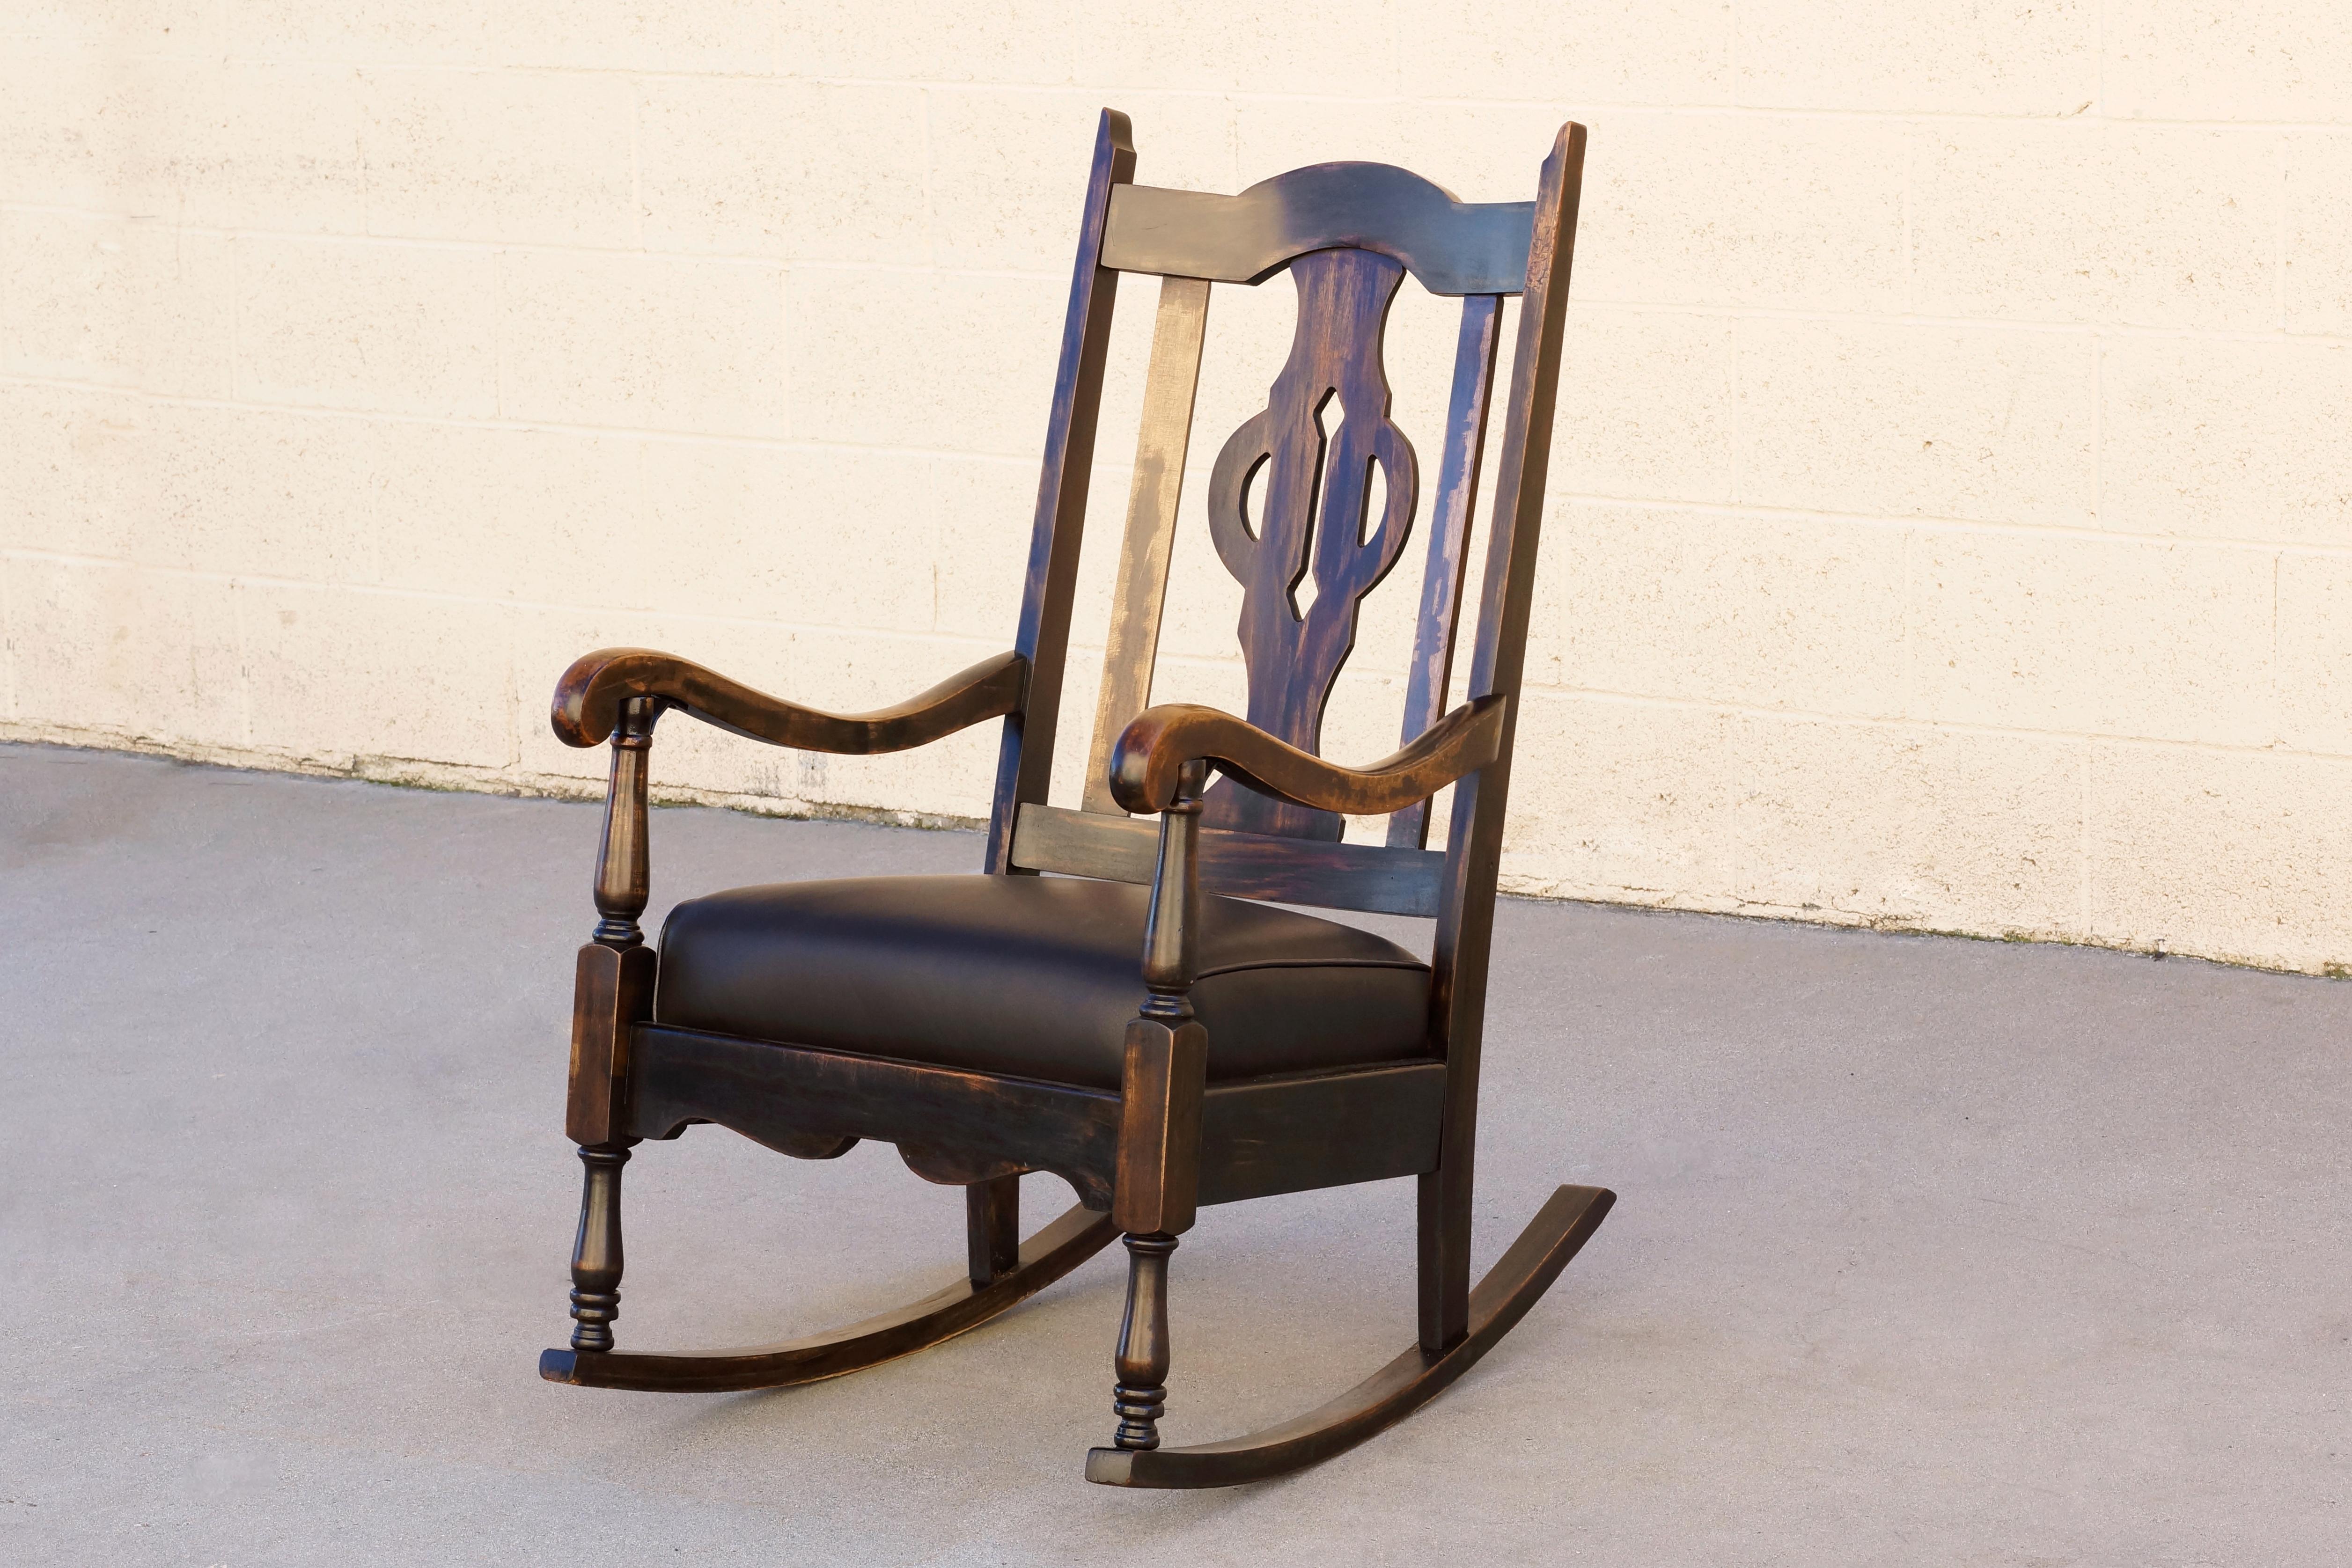 Antique Mission style rocking chair, circa 1900s, with unusual key symbol designed into the seat back. Composed of maple and newly upholstered leather seat. Reconditioned wood.

Dimensions: 22.5